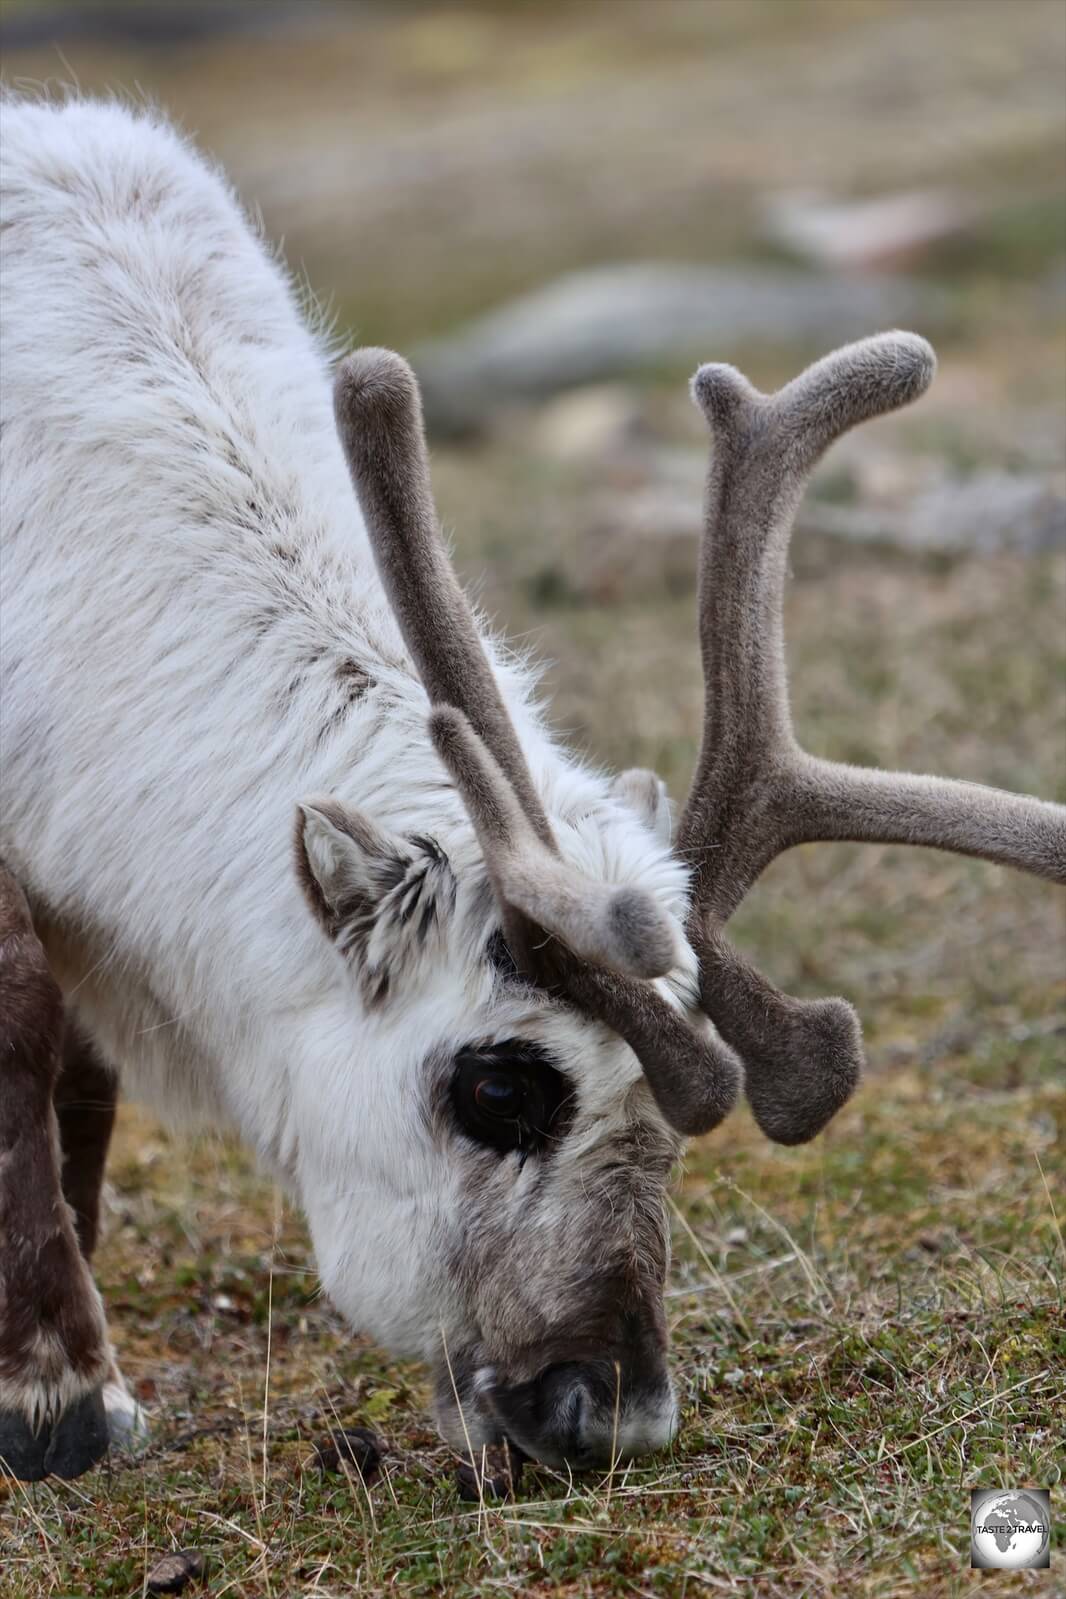 Reindeers use their antlers to scrape away snow and soil to find food, as well as to defend themselves.